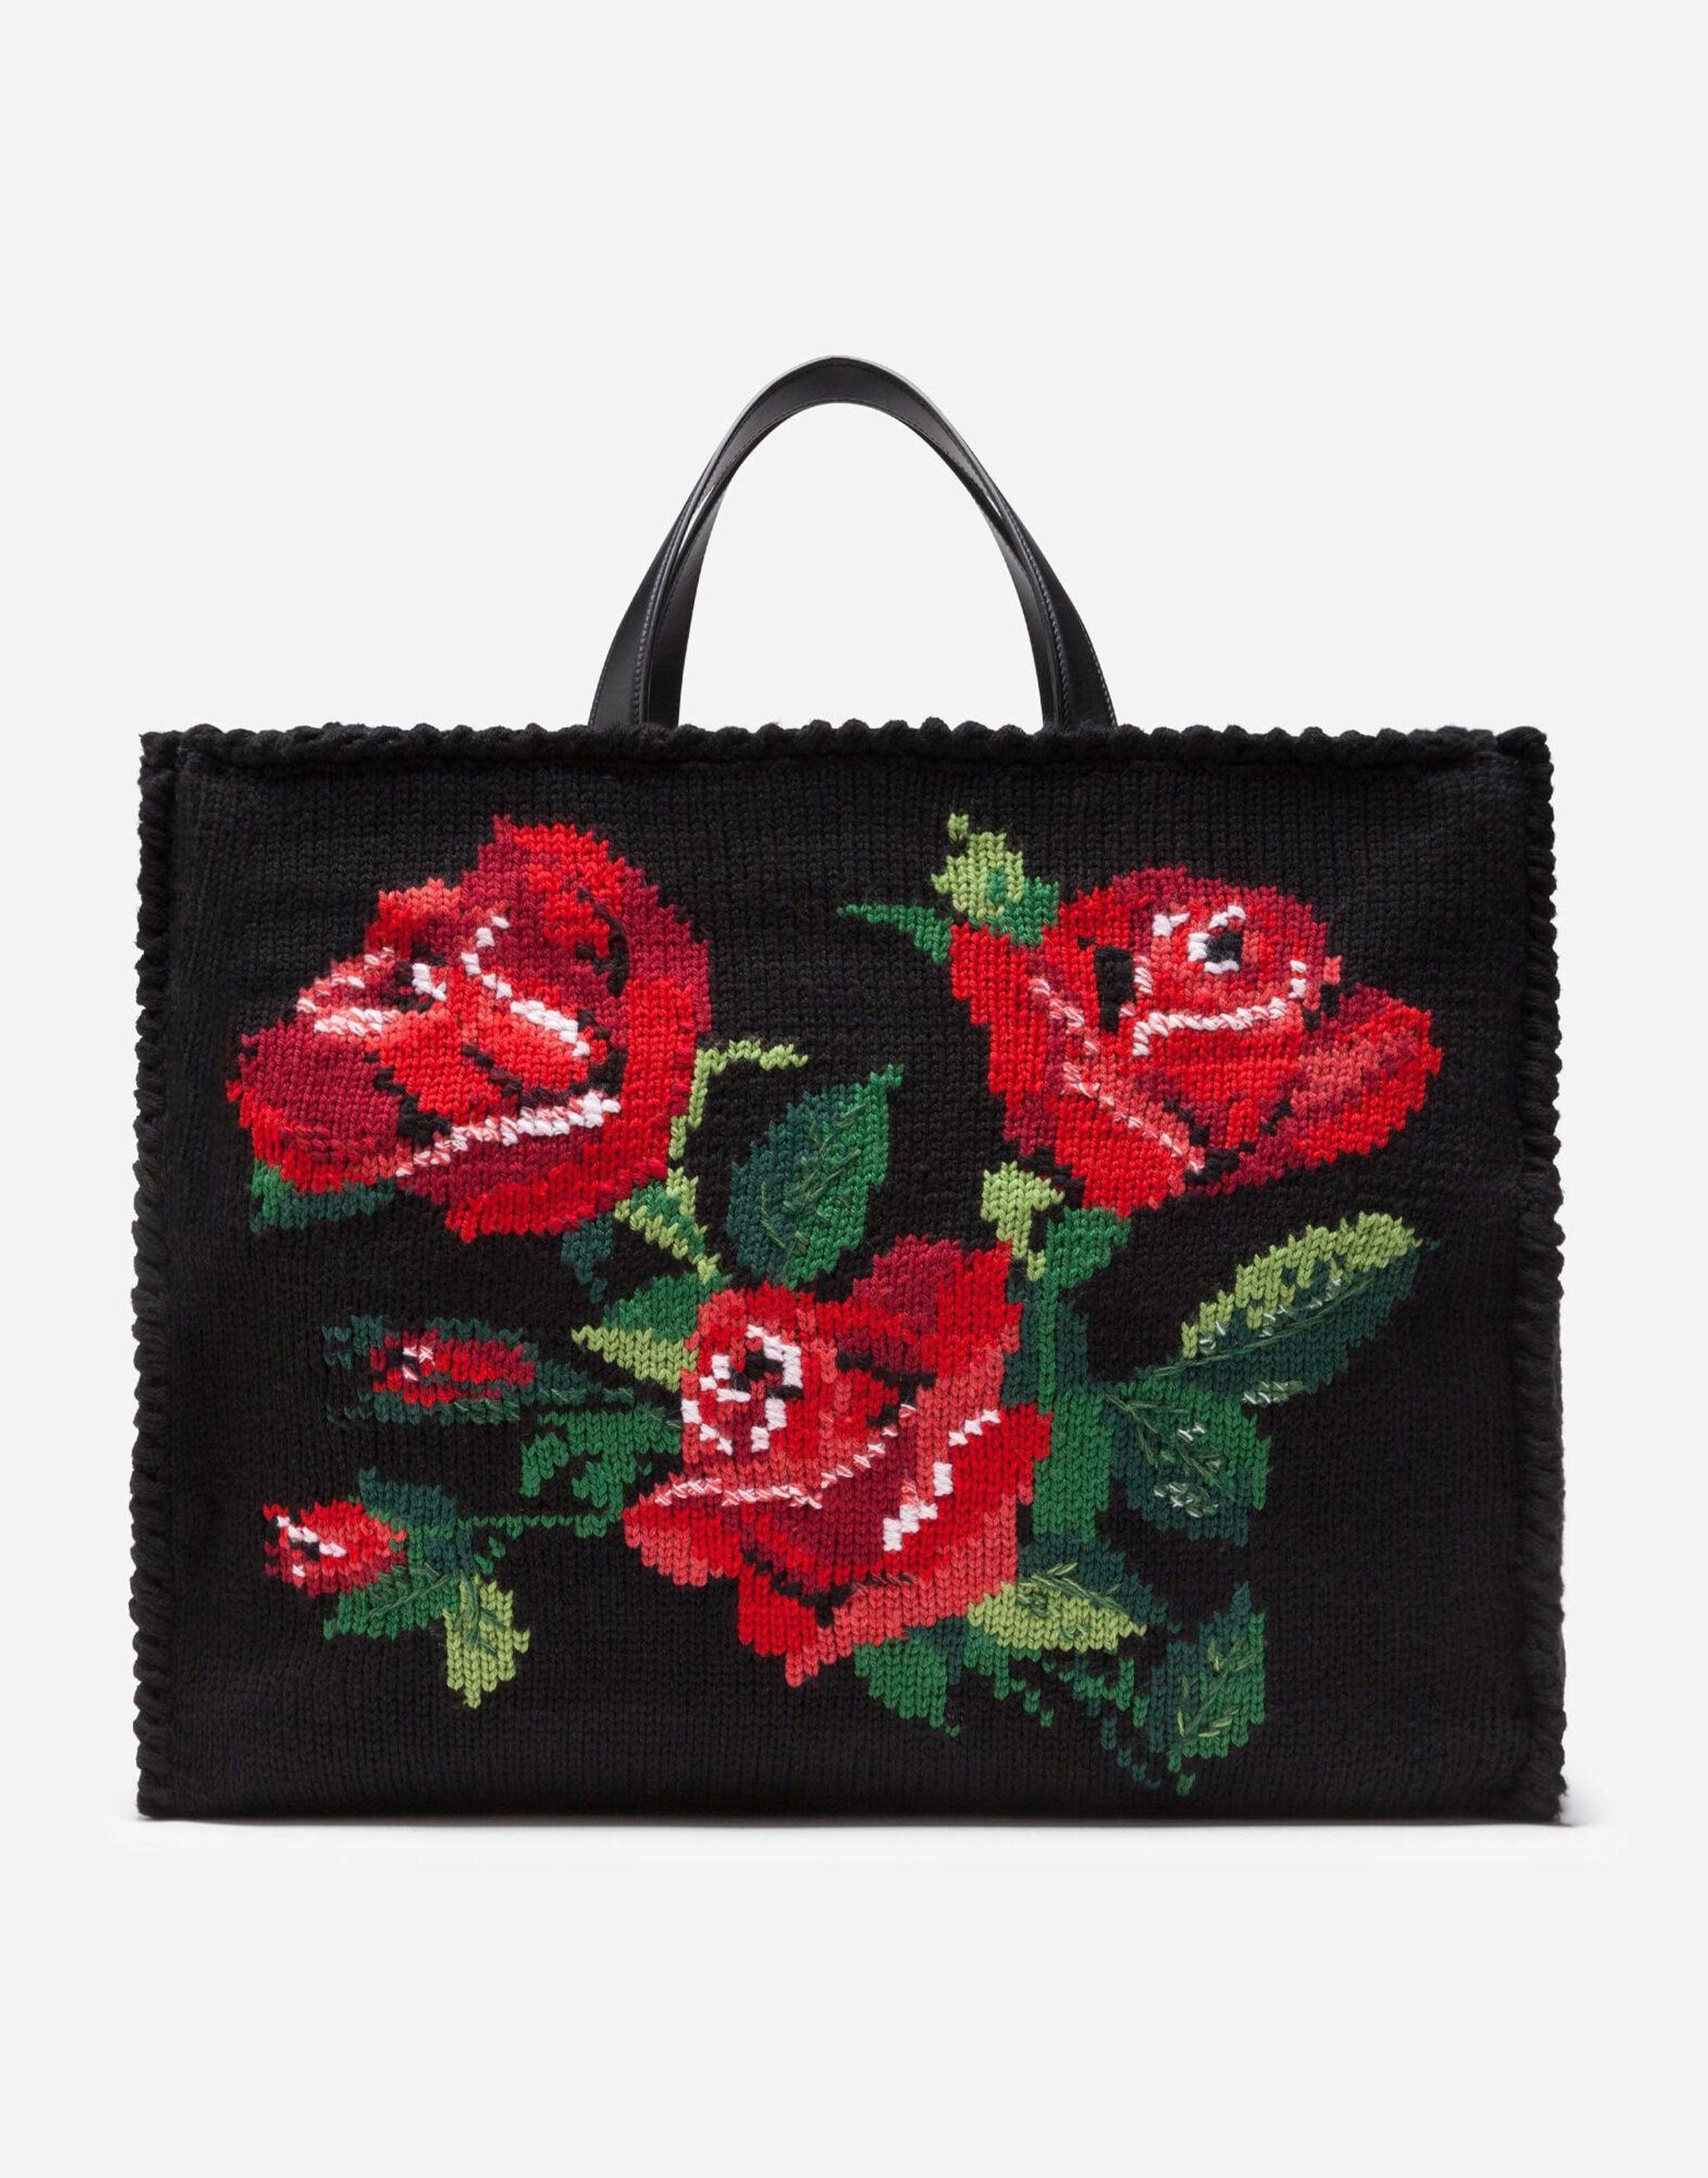 Dolce & Gabbana Large Beatrice Tote With Embroidered Roses